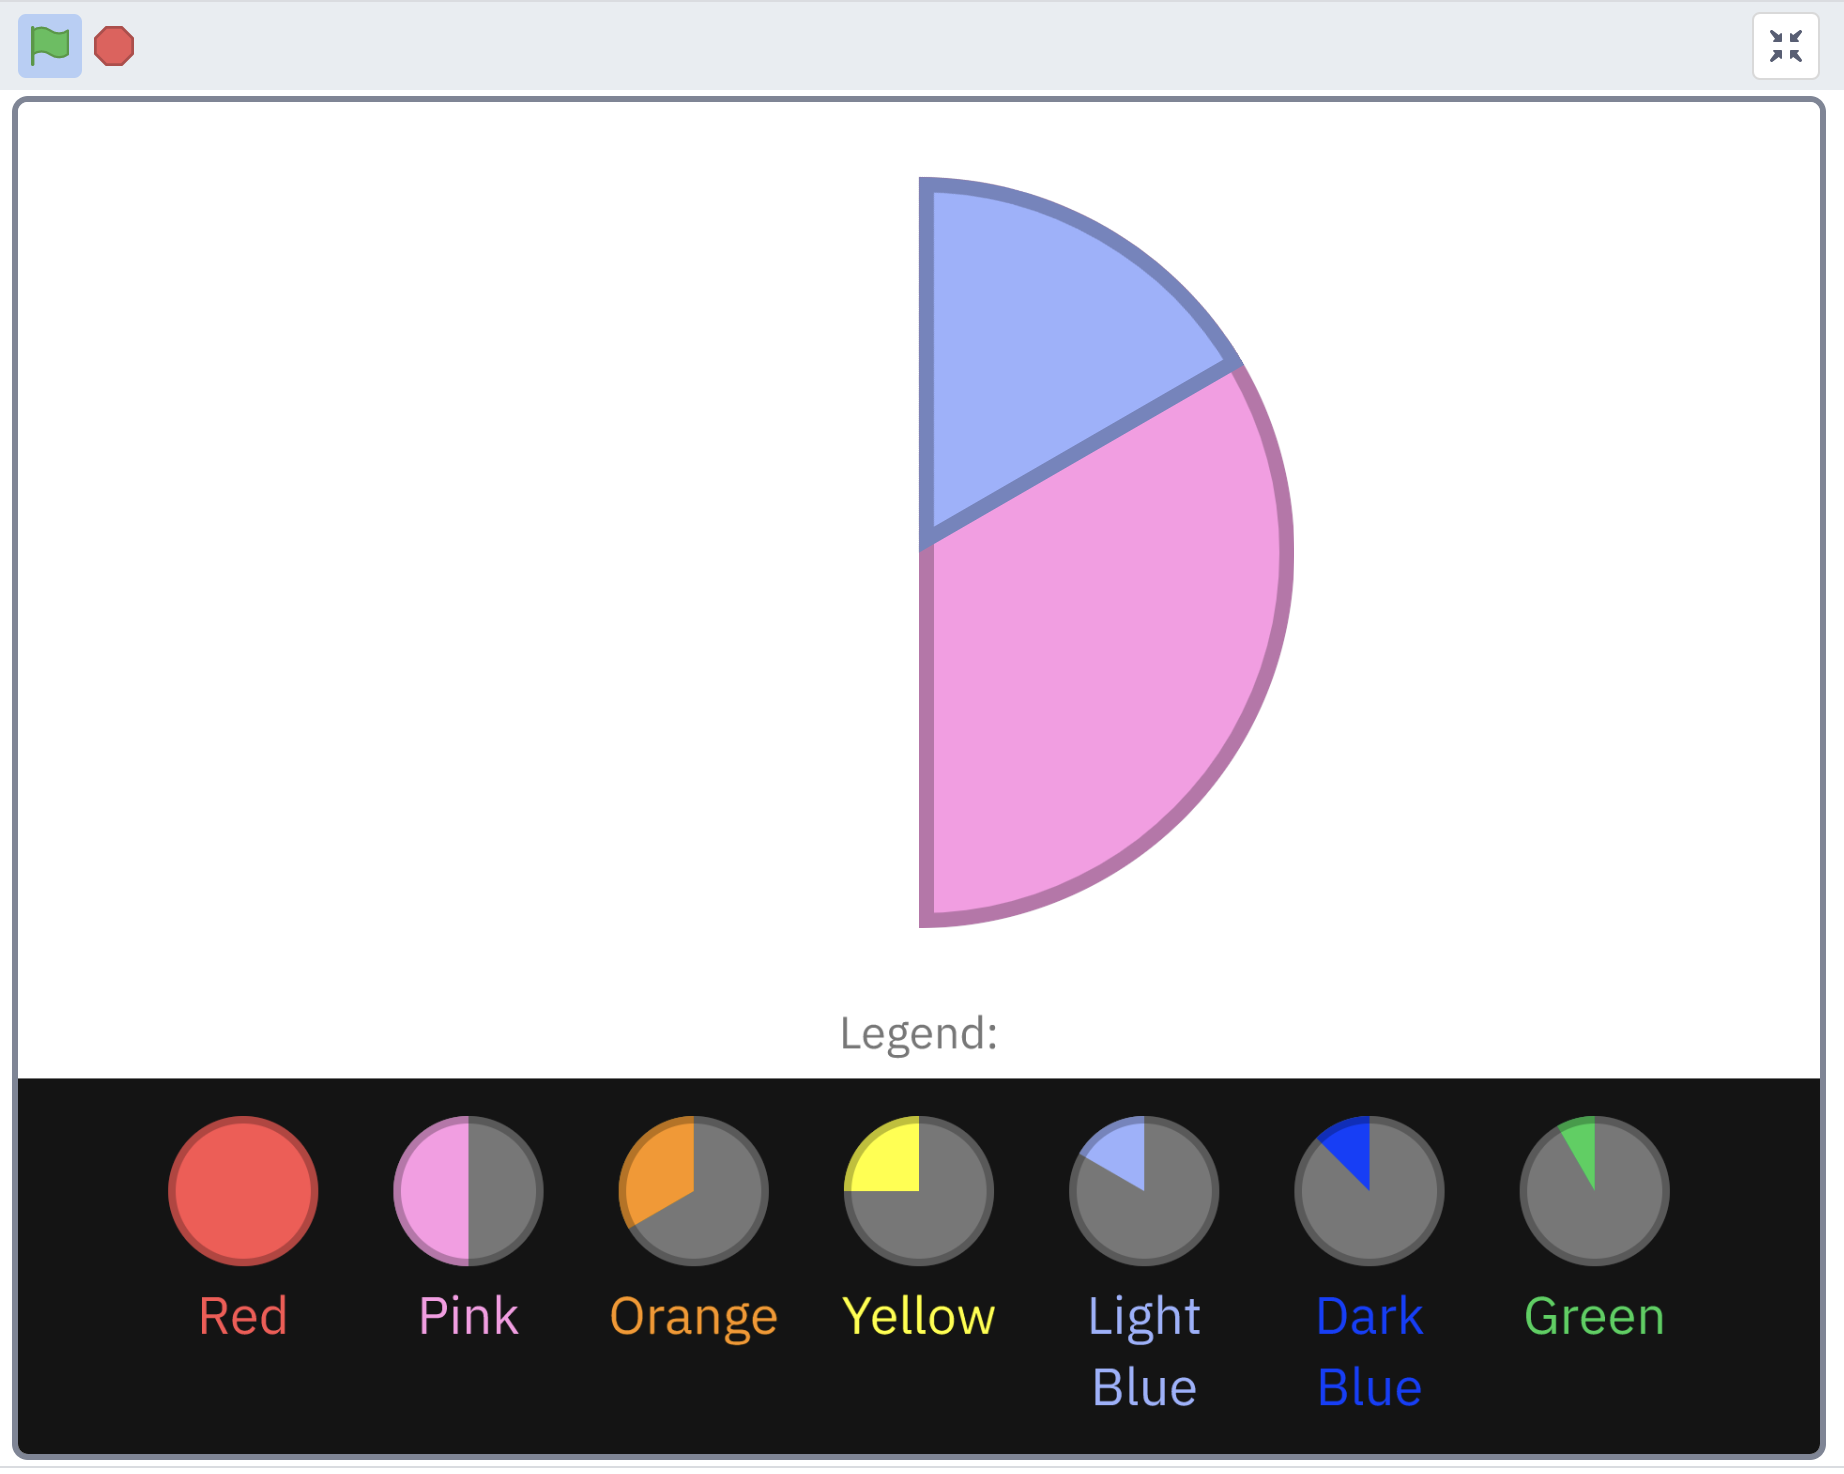 Scratch project stage depicting a semi-circle filled in with 1/3 blue portion and 2/3 pink portion. Below are 7 fractional segment options: whole, half, third, quarter, sixth, eighth, and twelfth.